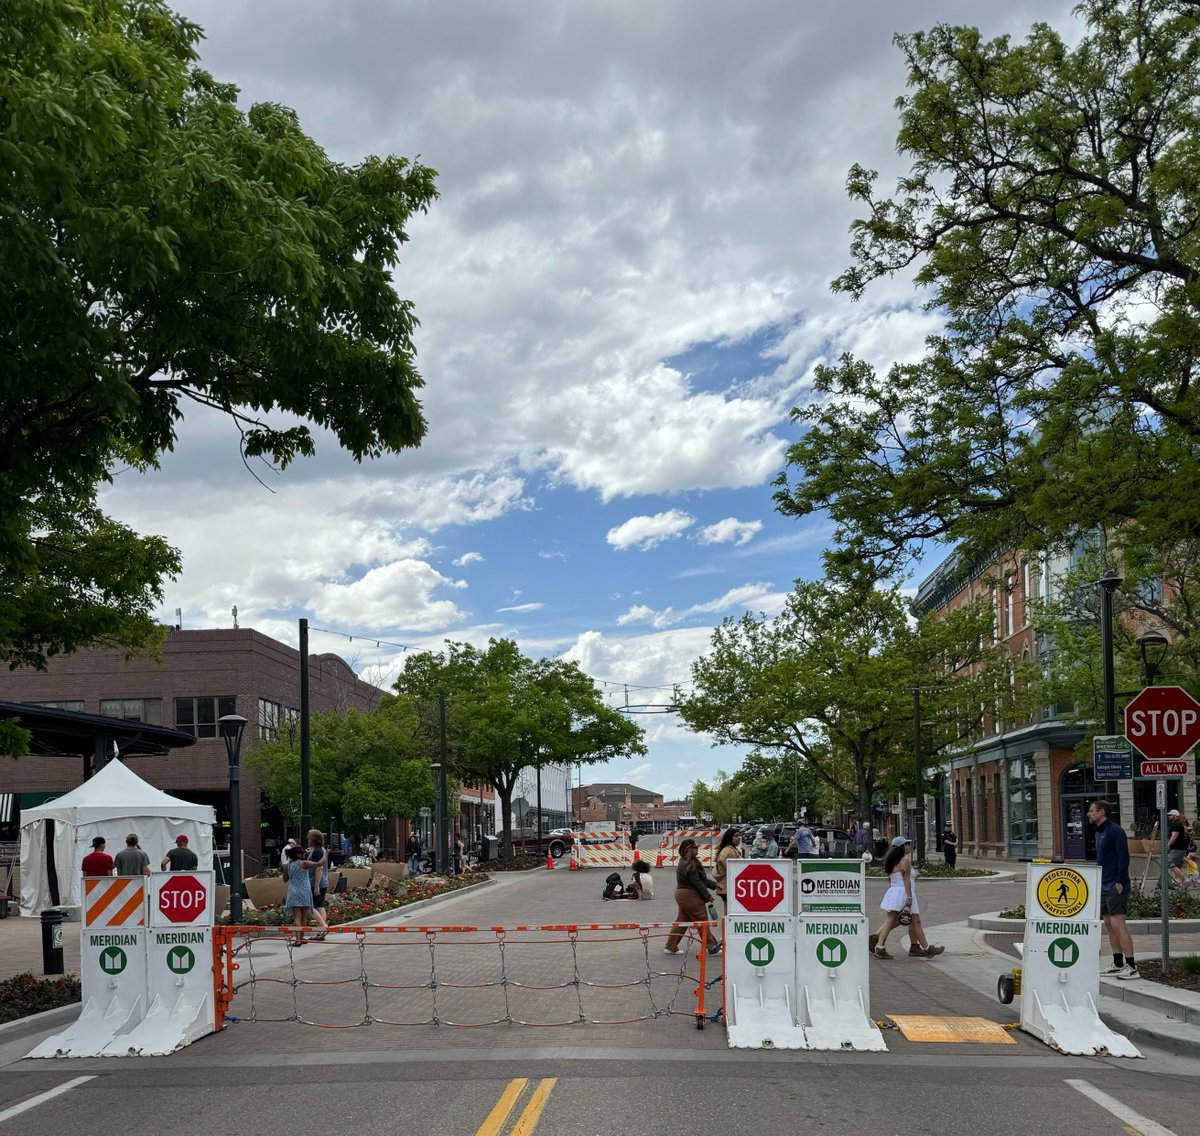 A beautiful day for Global Sounds in Fort Collins, Colorado, an event celebrating music from around the world. Our extremely popular beam gate was on hand to create a safer experience for all. #vehiclebarriers #eventsafety #crowdprotection @fortcollinsgov